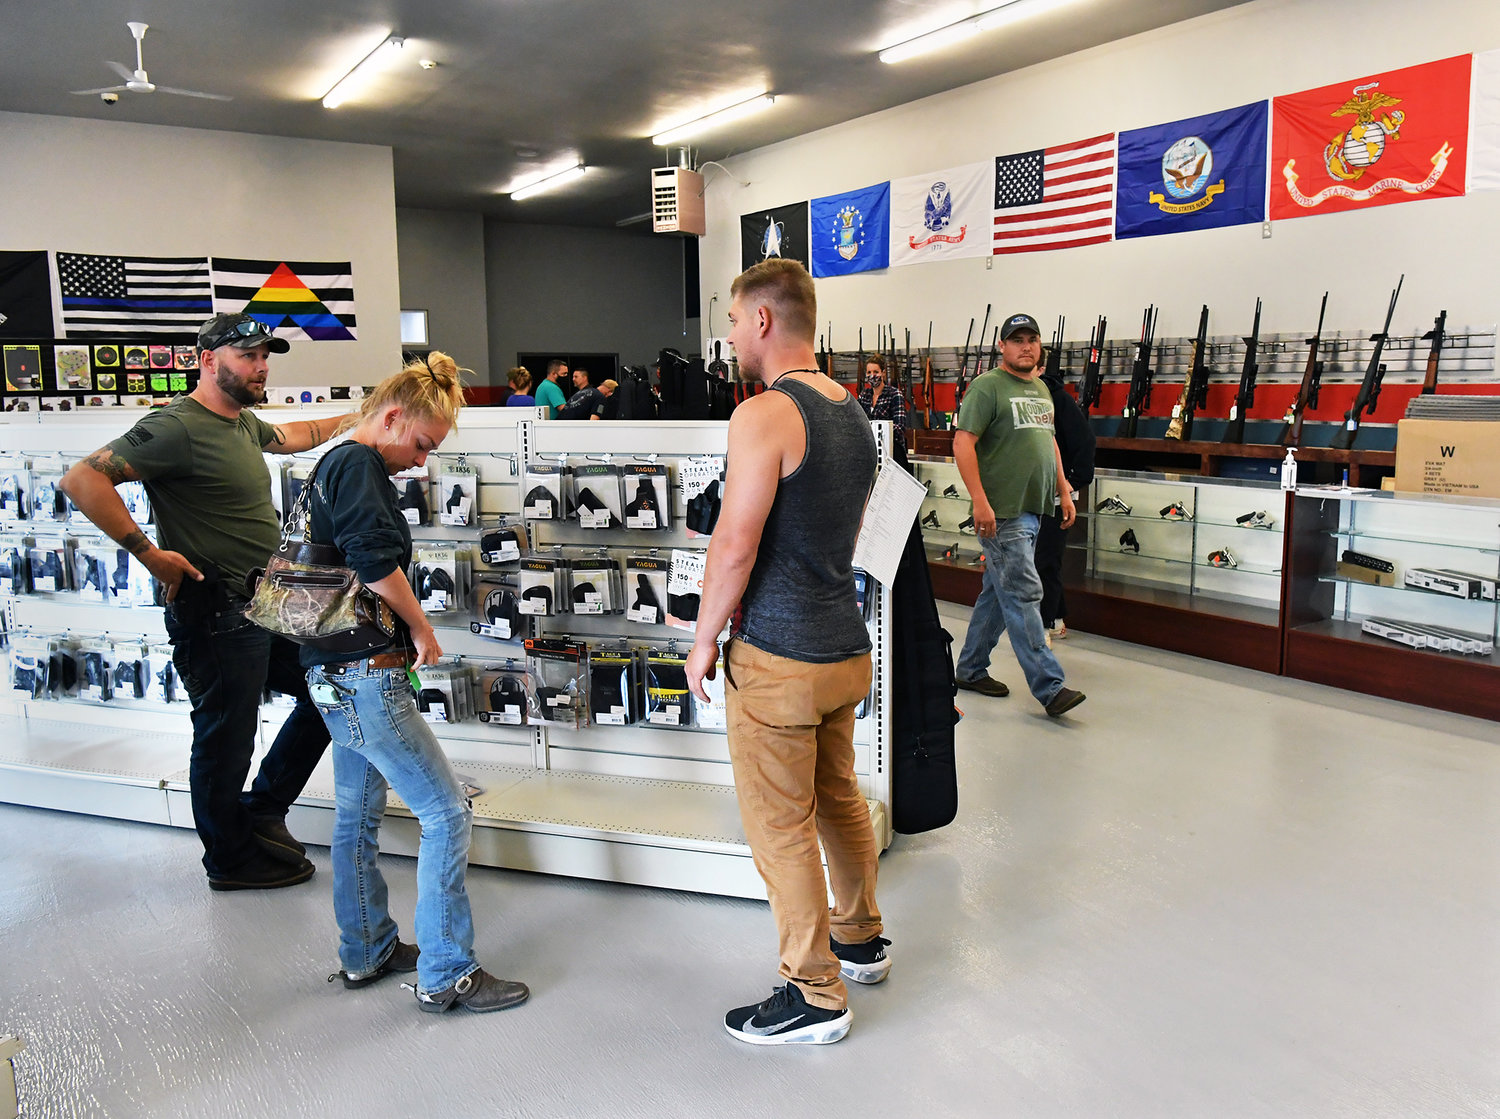 Customers browse the merchandise inside Long Shot Inc. in Yelm on Thursday, Aug. 6.